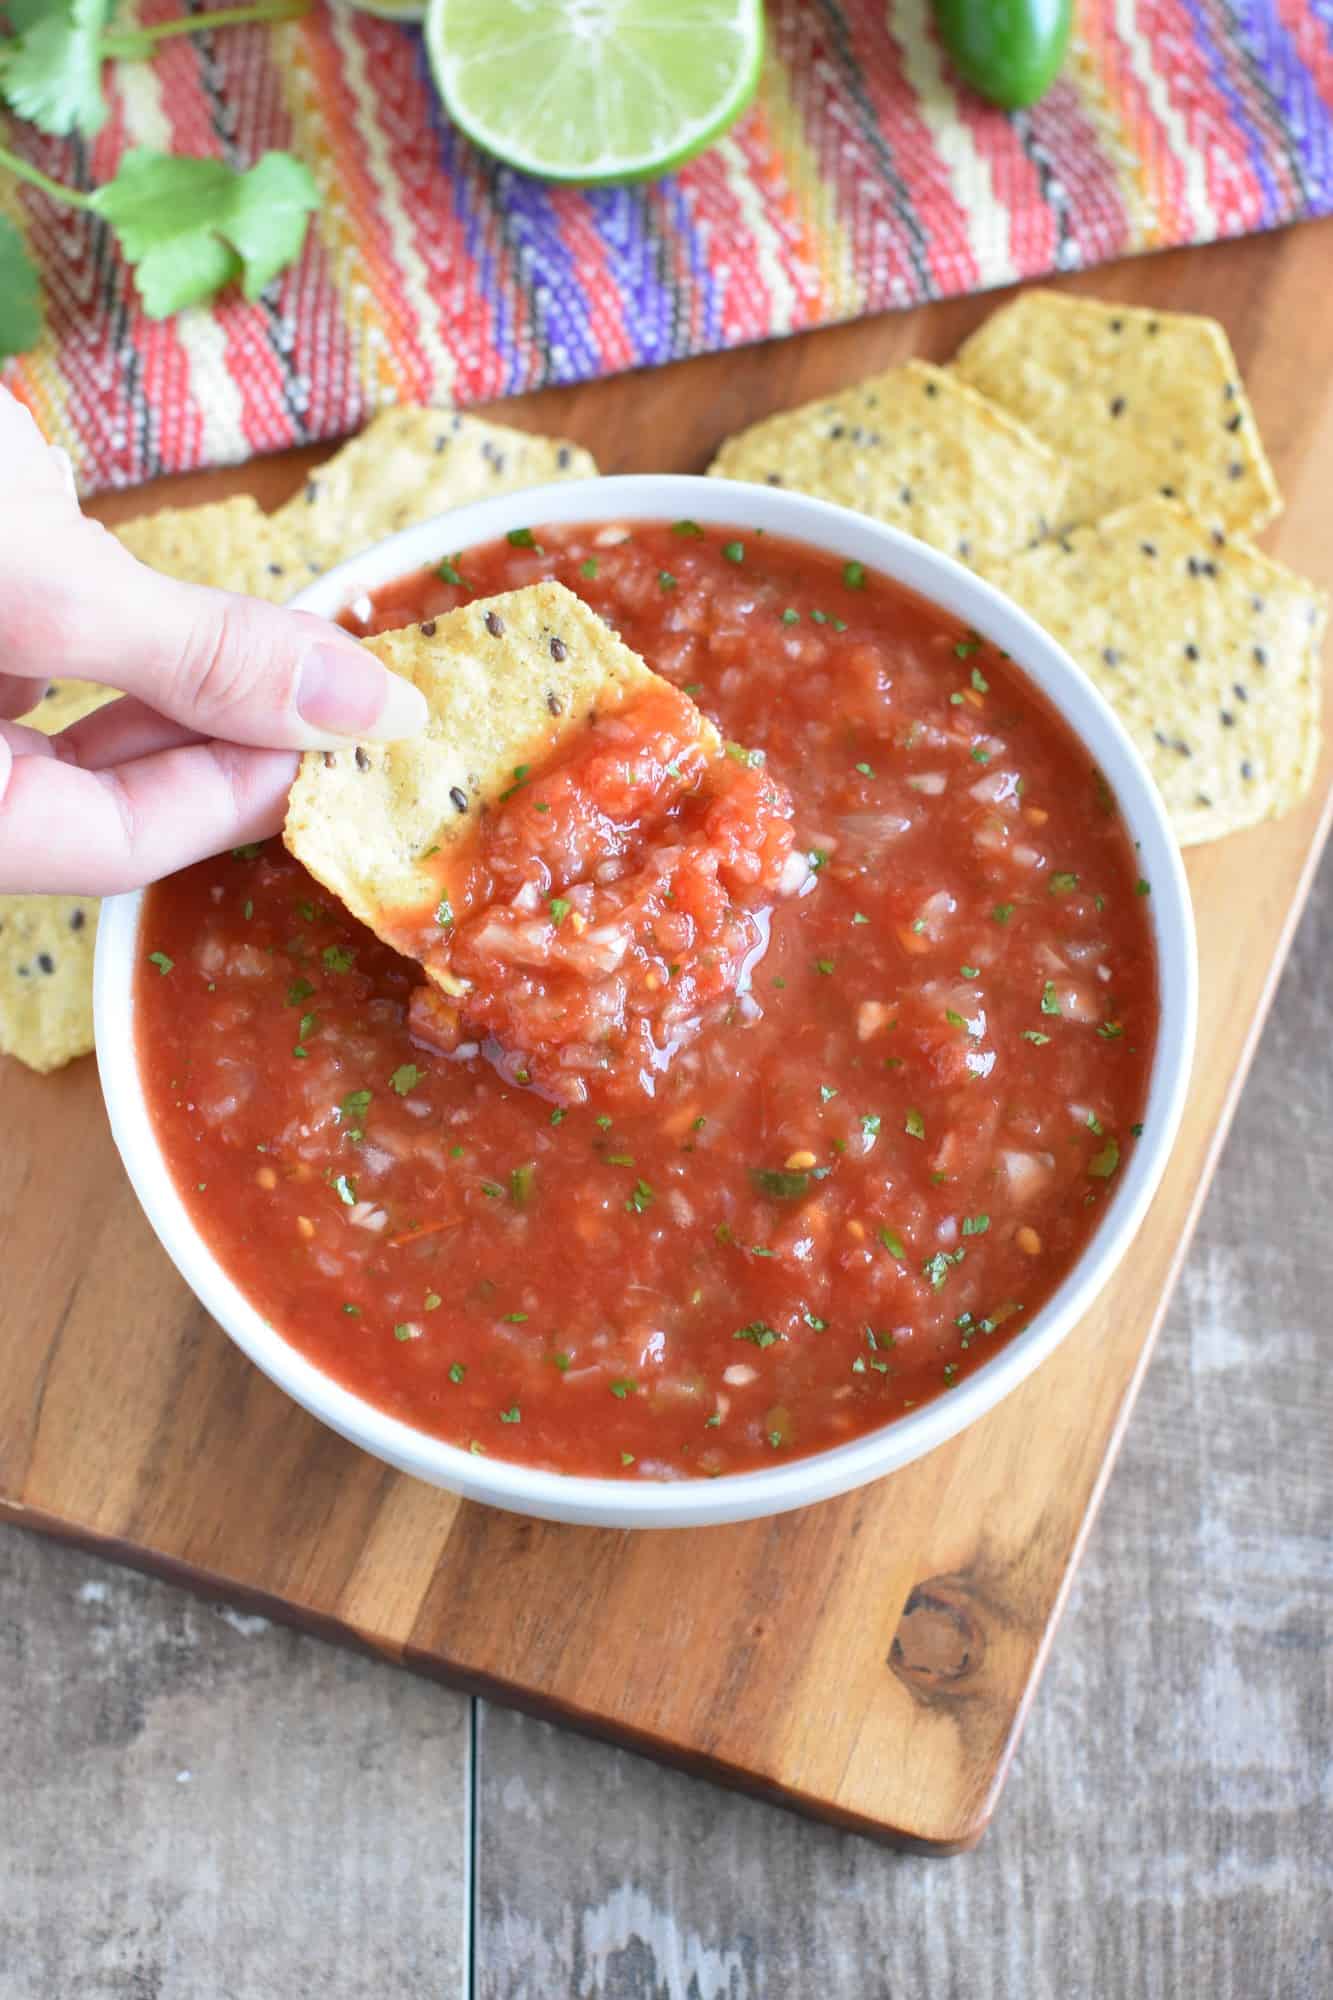 holding a chip with restaurant-style salsa on it over the bowl of the rest of the salsa